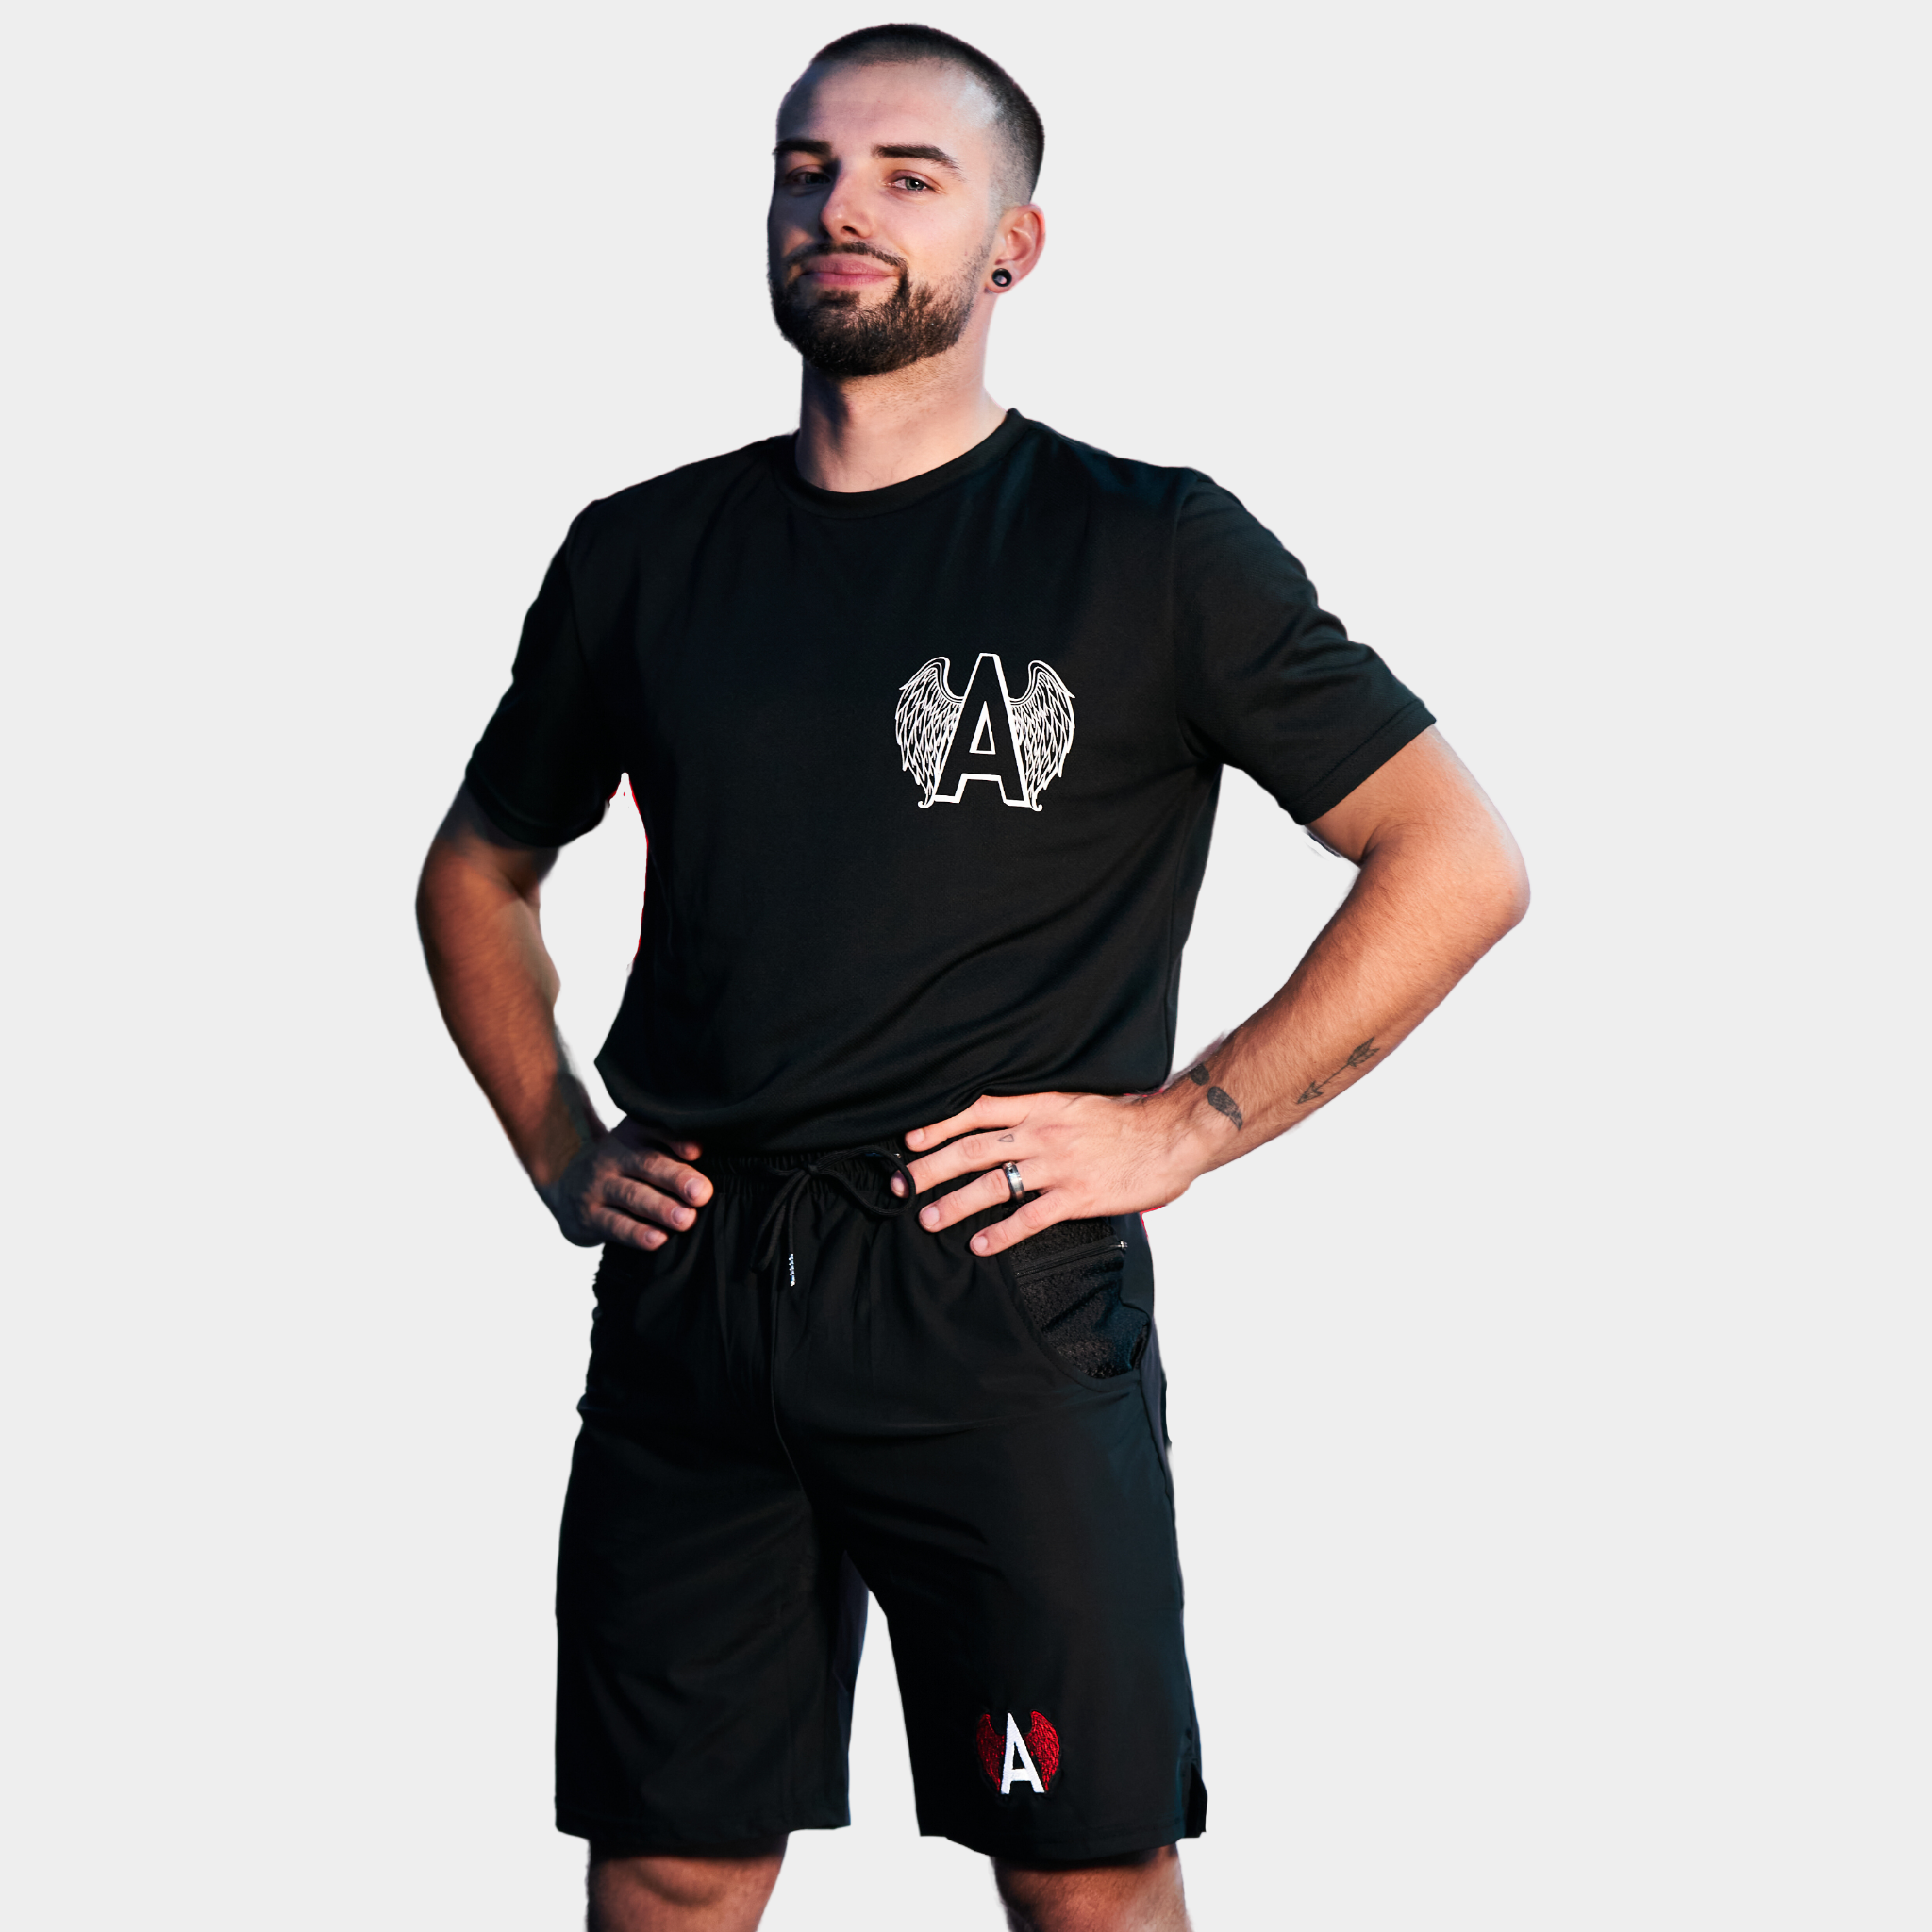 Essentials Embroidered Training Shorts